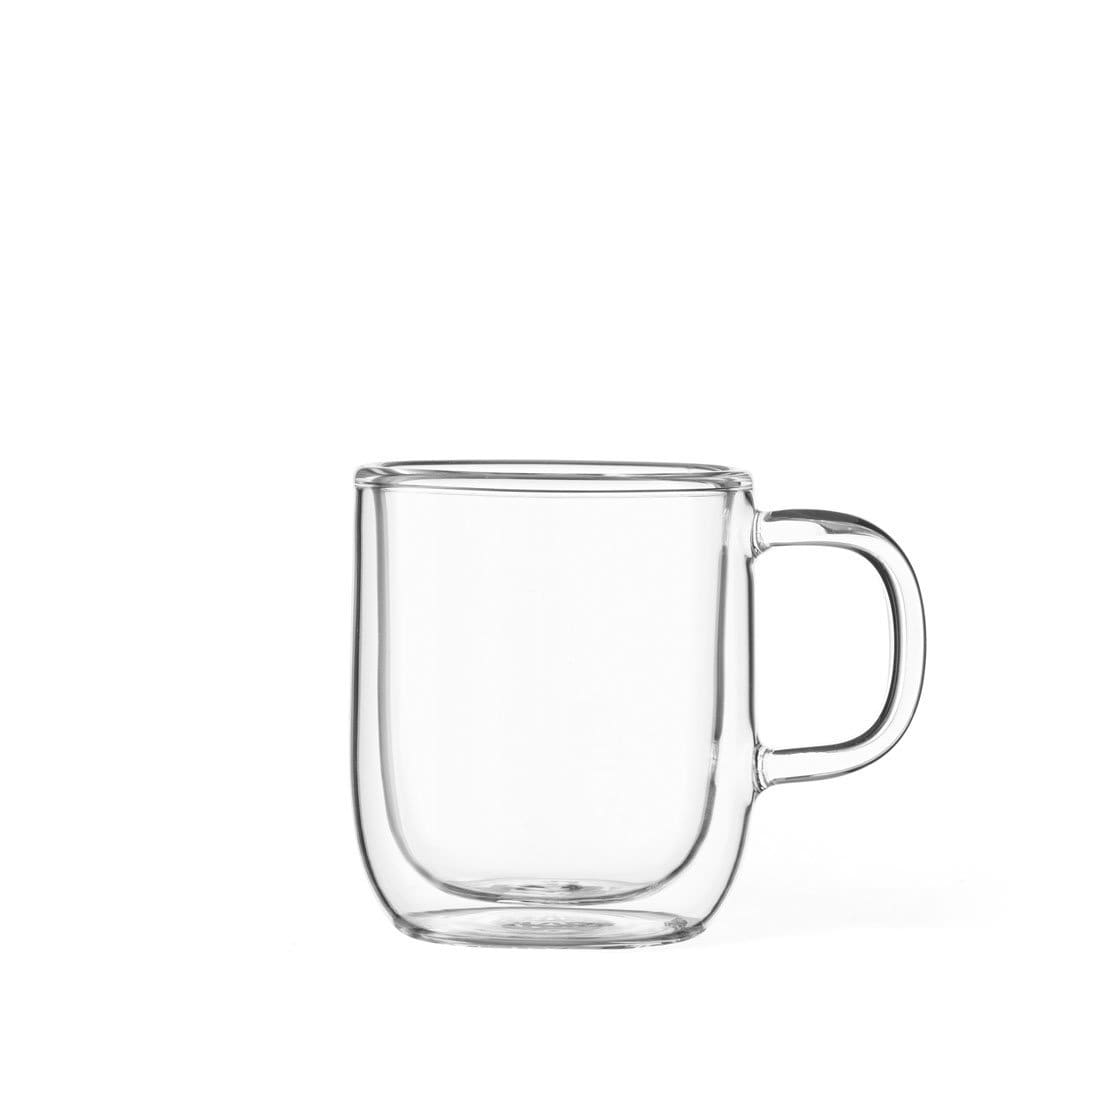 https://cdn.shopify.com/s/files/1/0066/5423/0564/products/Classic_E2_84_A2-Double-walled-glass-with-handle_005L_1200x.jpg?v=1572920576